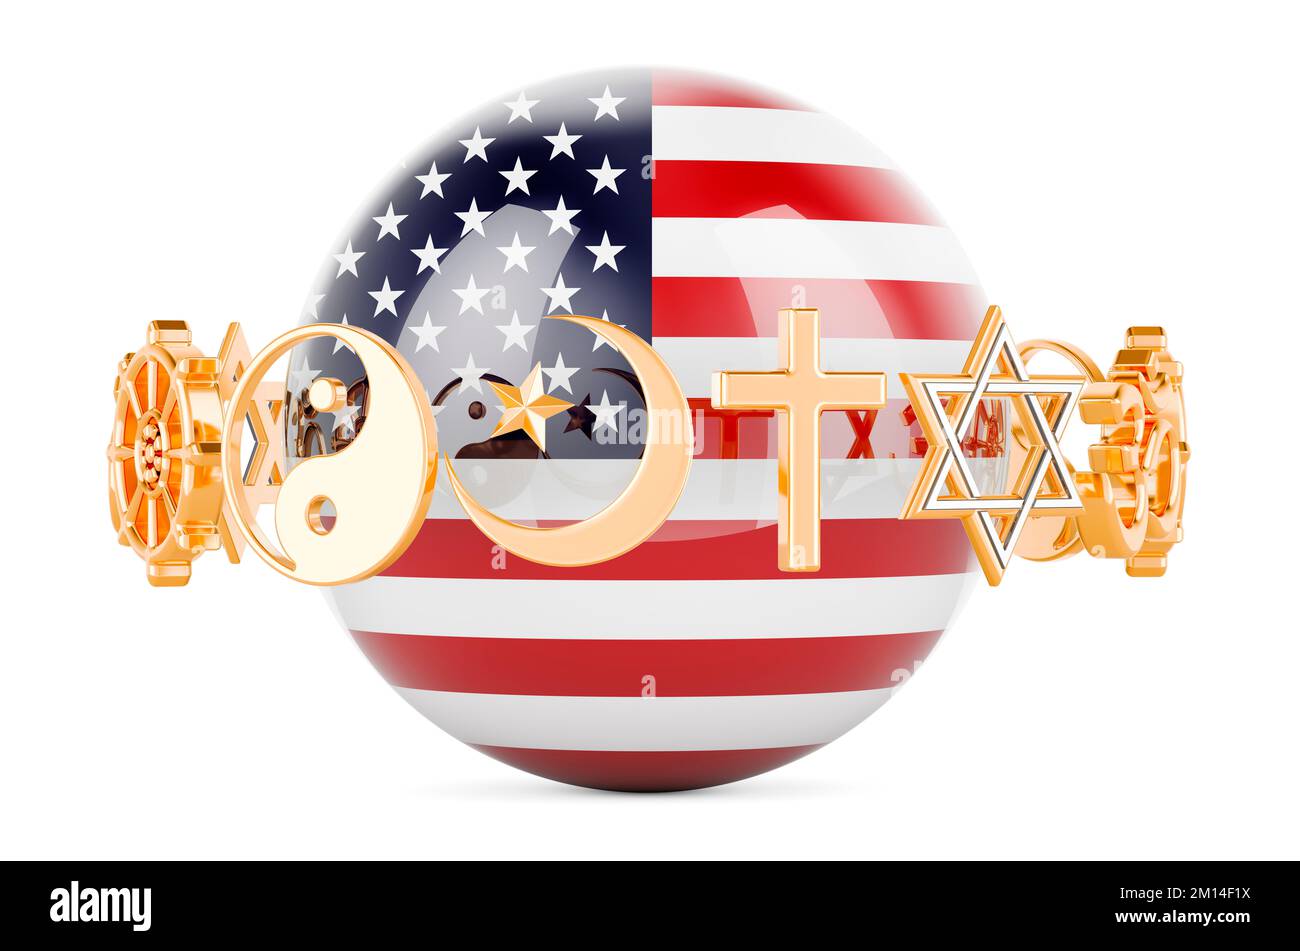 The United States flag painted on sphere with religions symbols around, 3D rendering isolated on white background Stock Photo